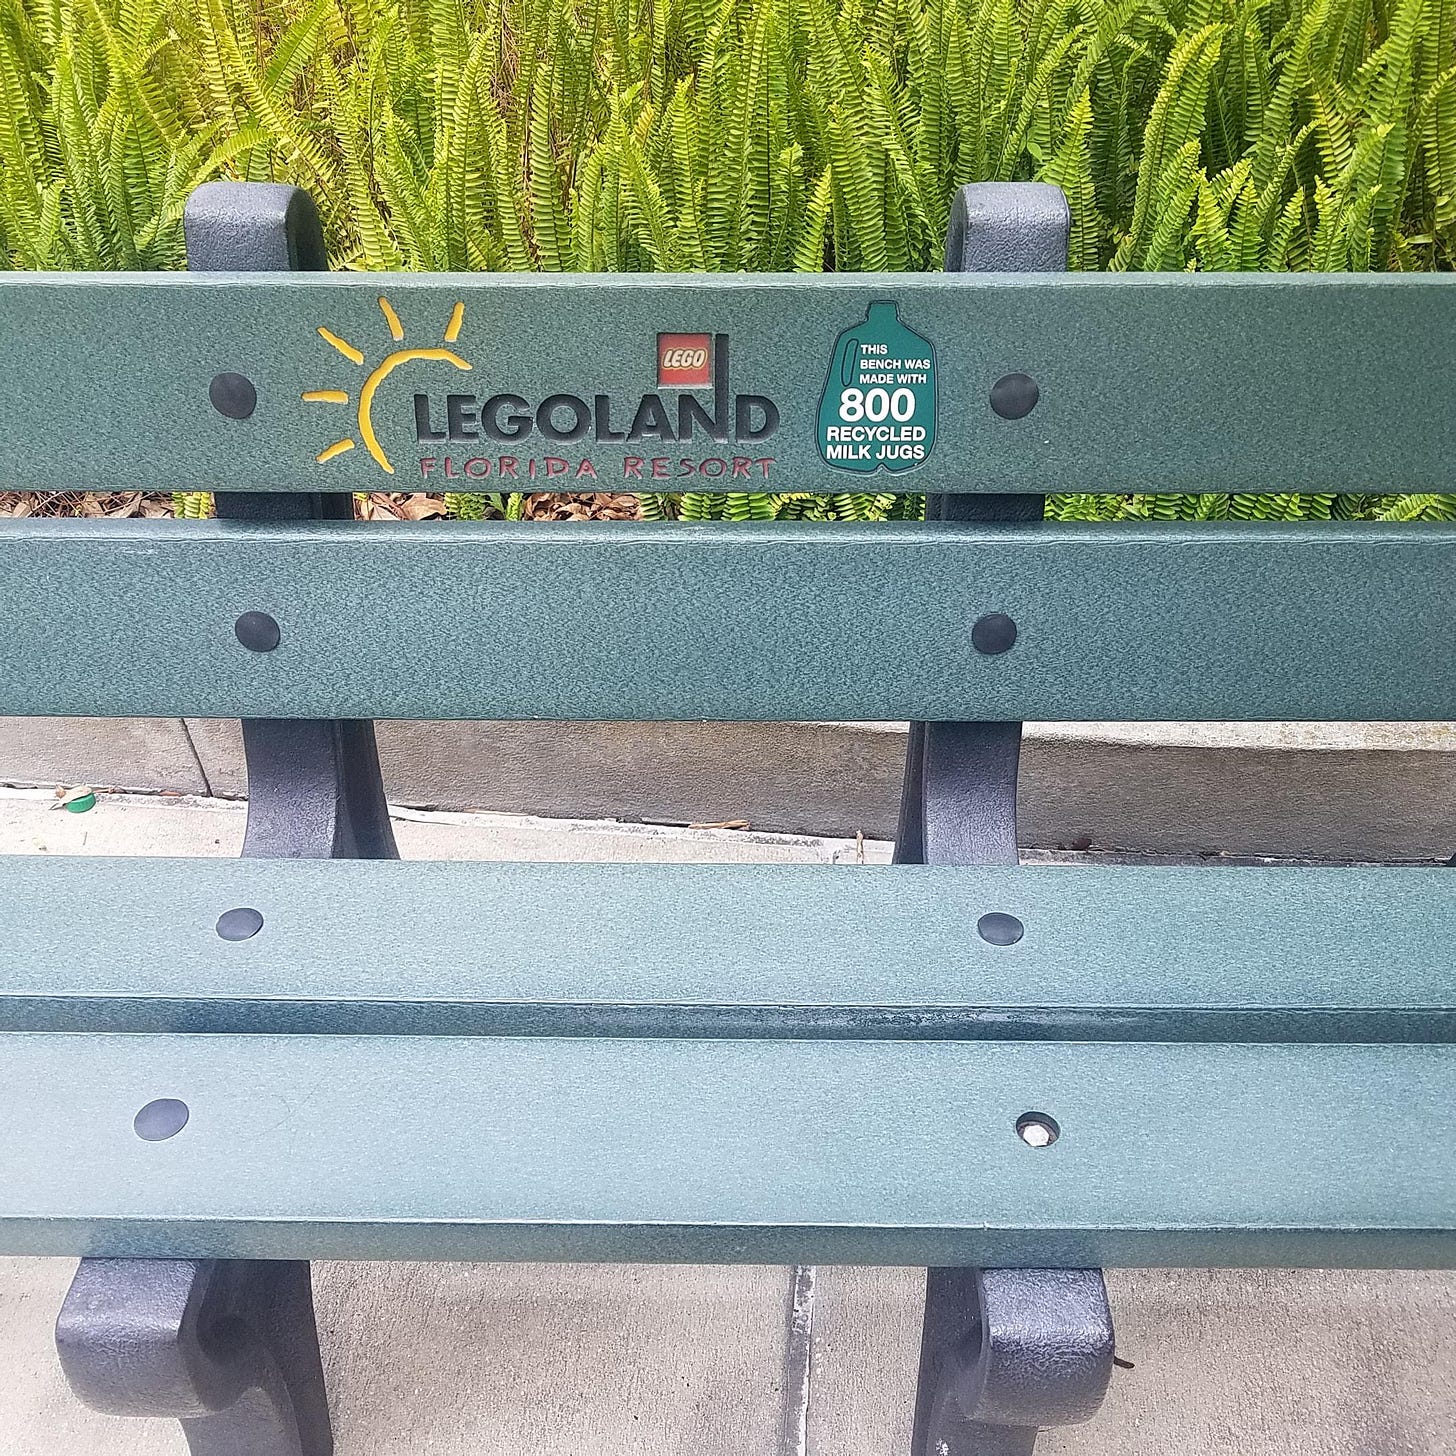 This bench at Legoland made from recycled milk jugs : mildlyinteresting